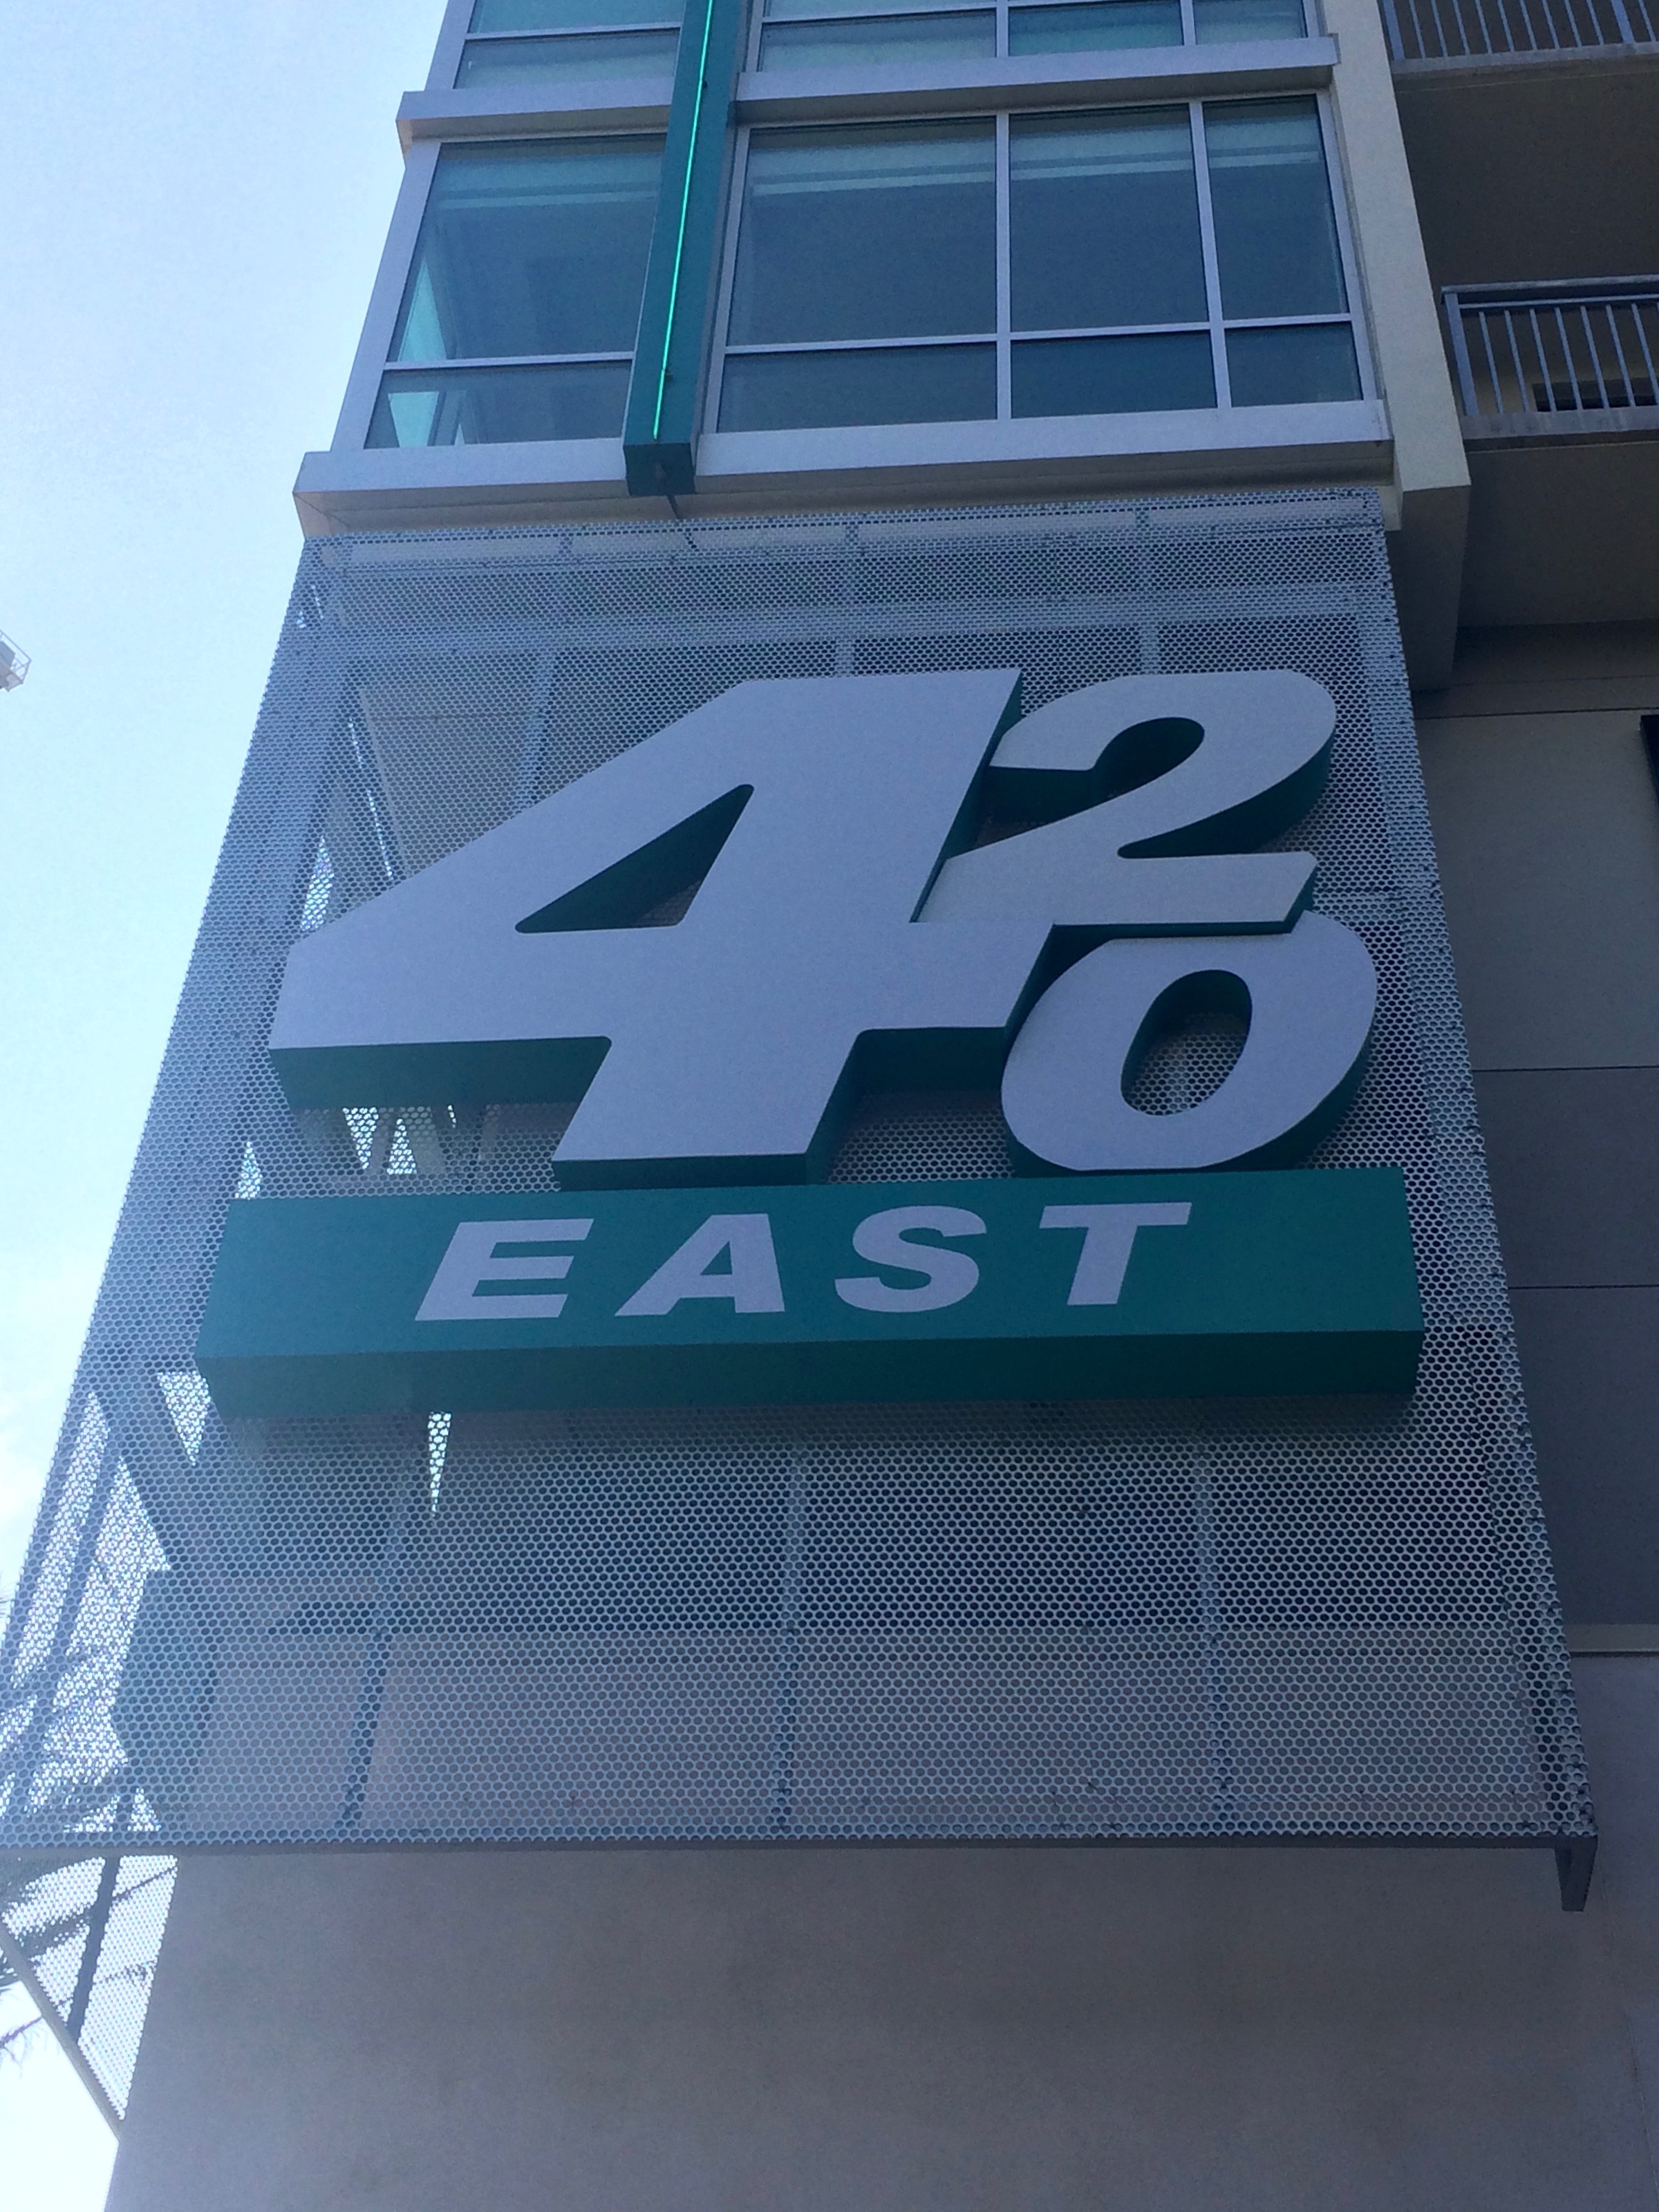 420 East Sign